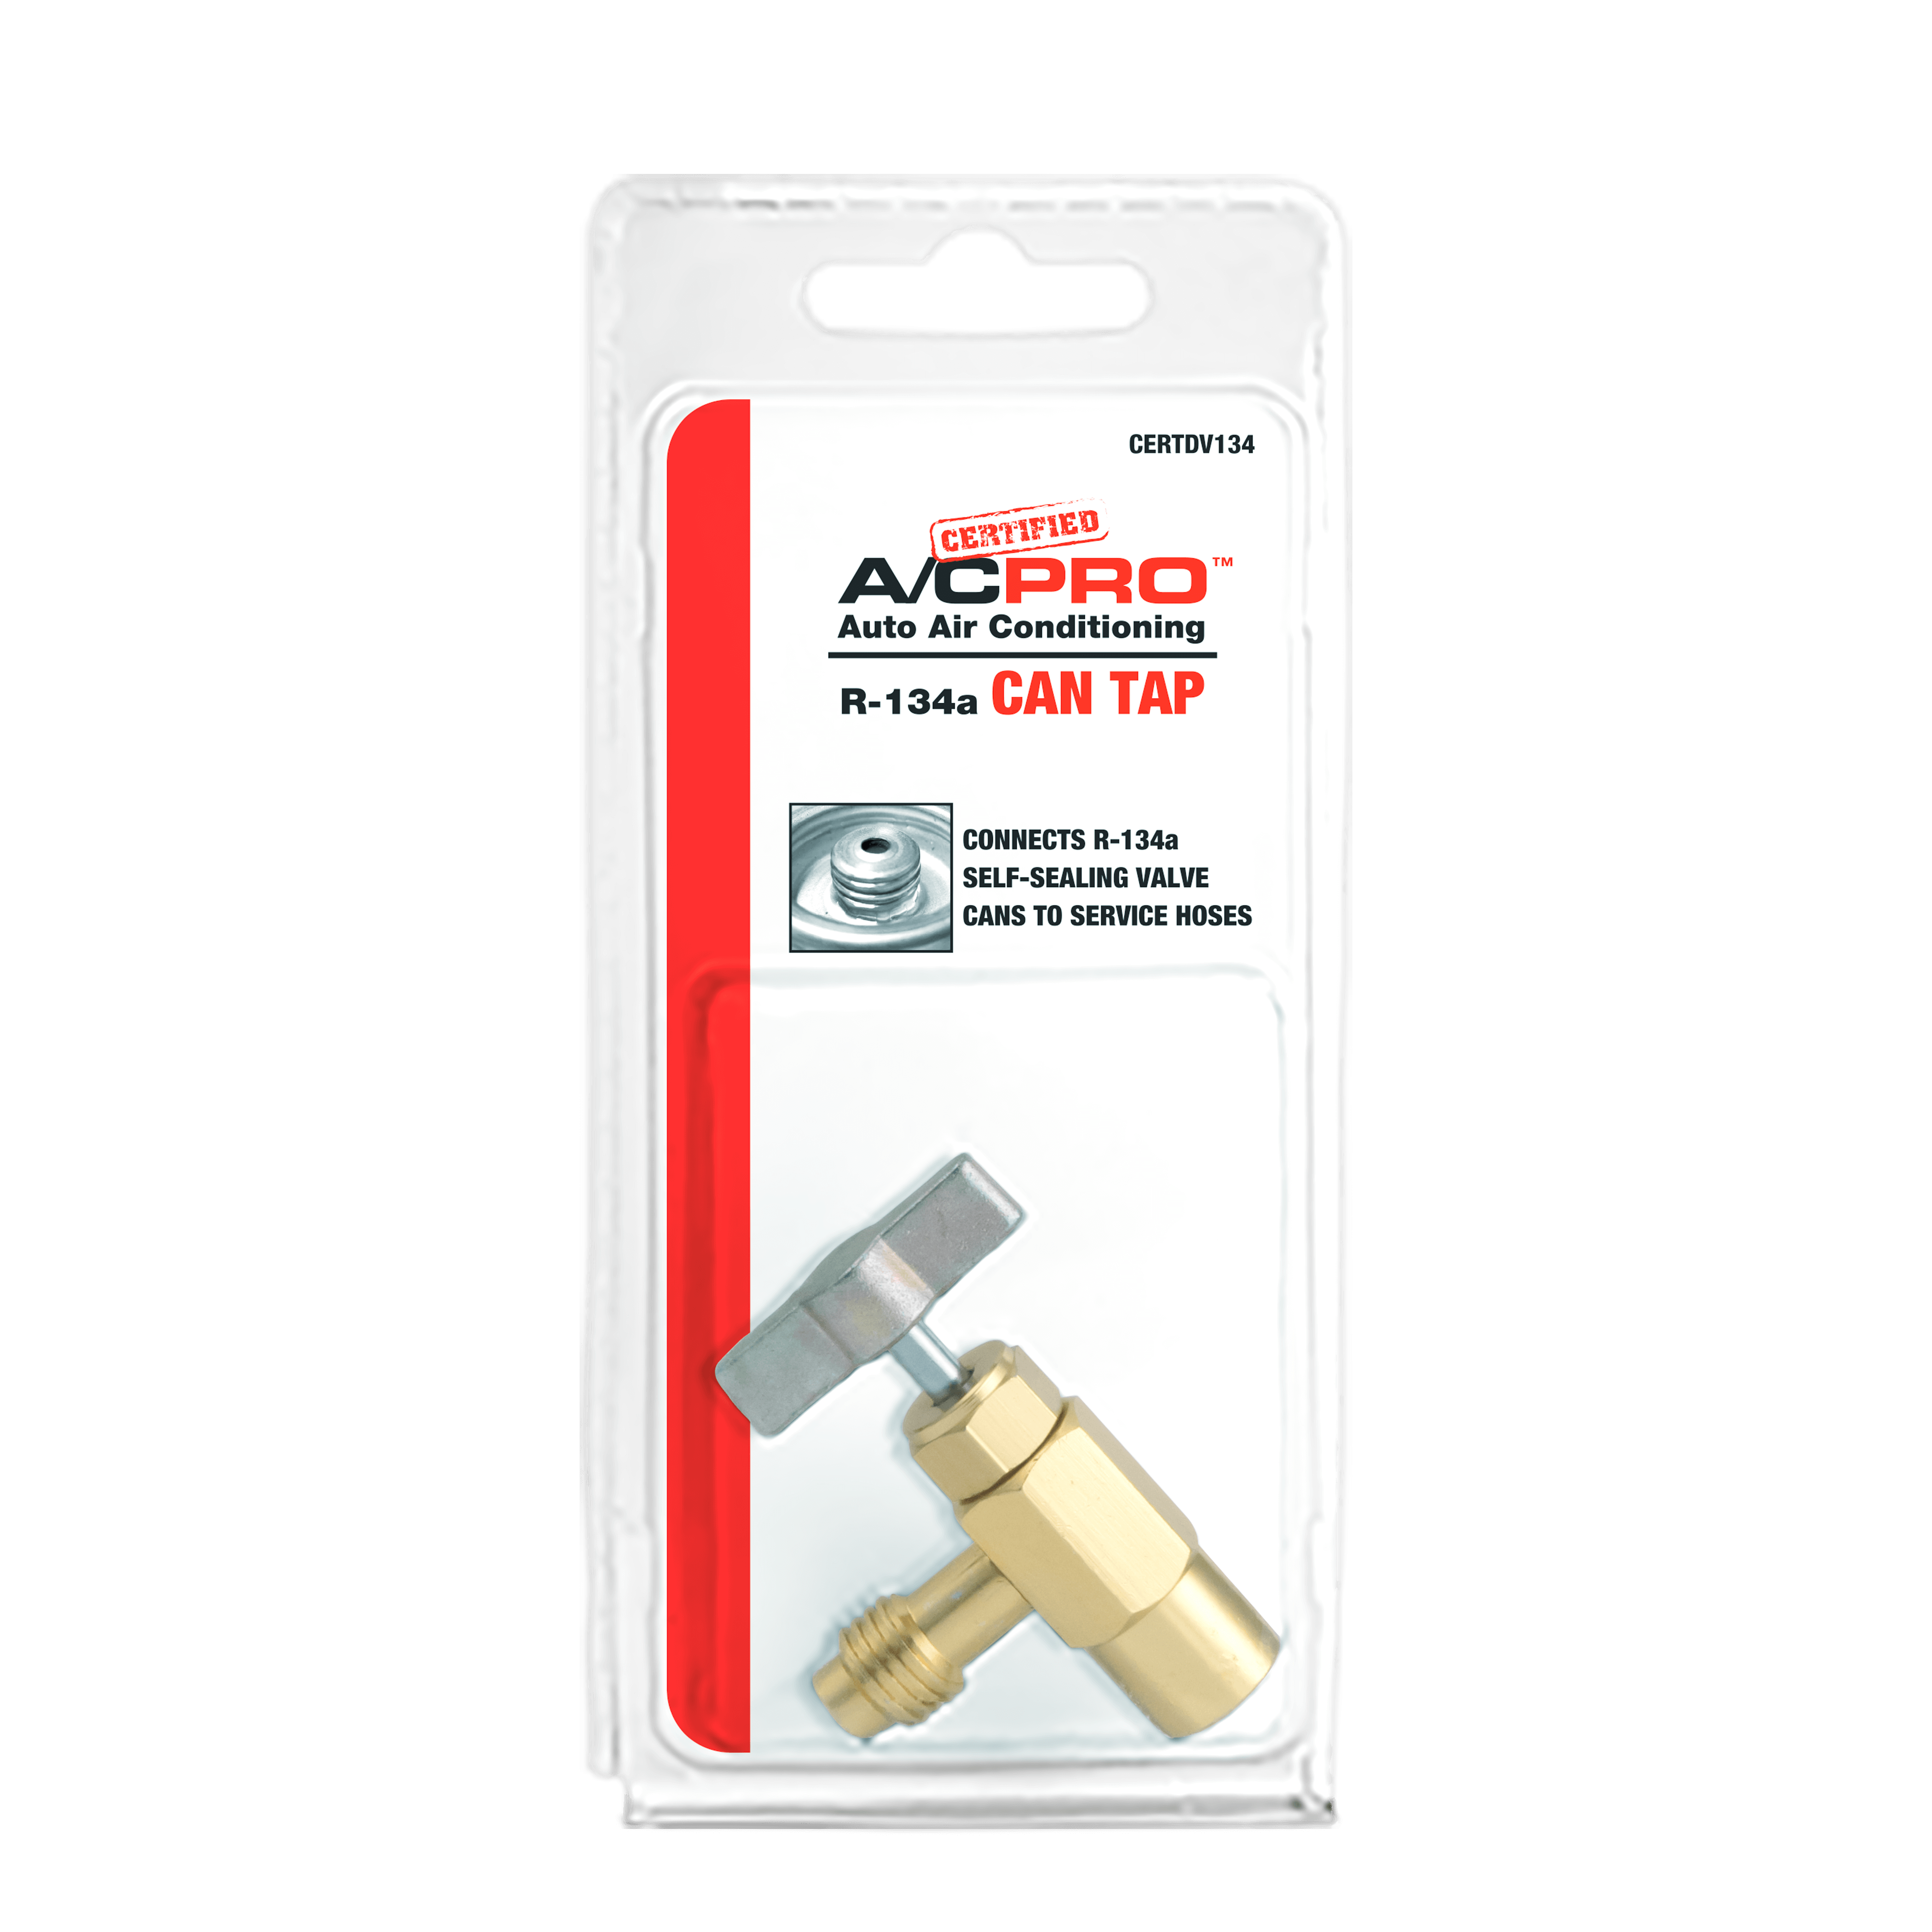 CERTDV134 | Certified A/C Pro™ Auto Air Conditioning R-134a Can Tap